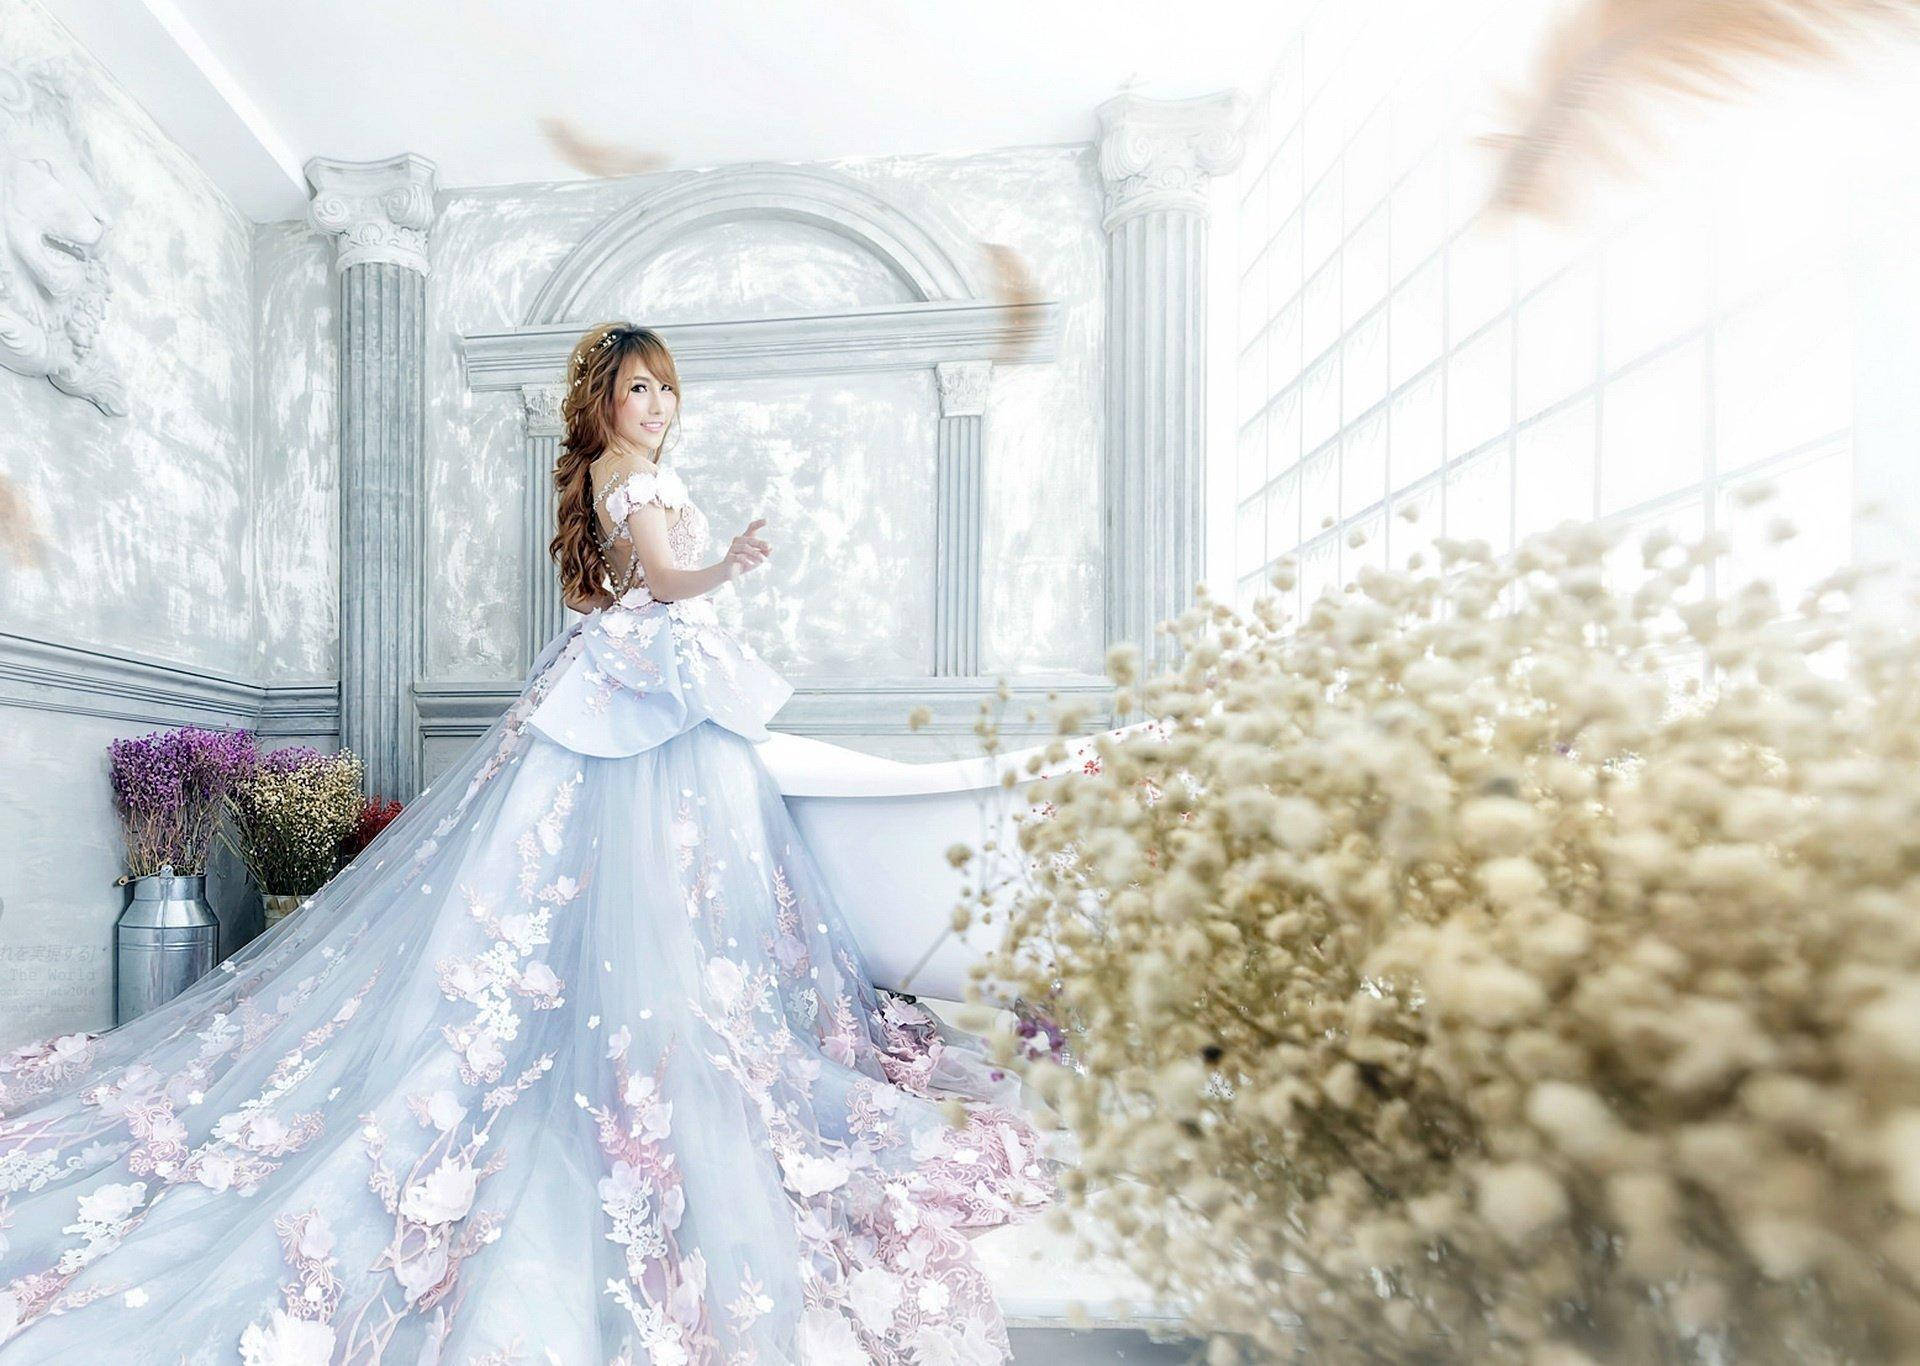 Download Graceful Bride On Her Special Day Wallpaper | Wallpapers.com